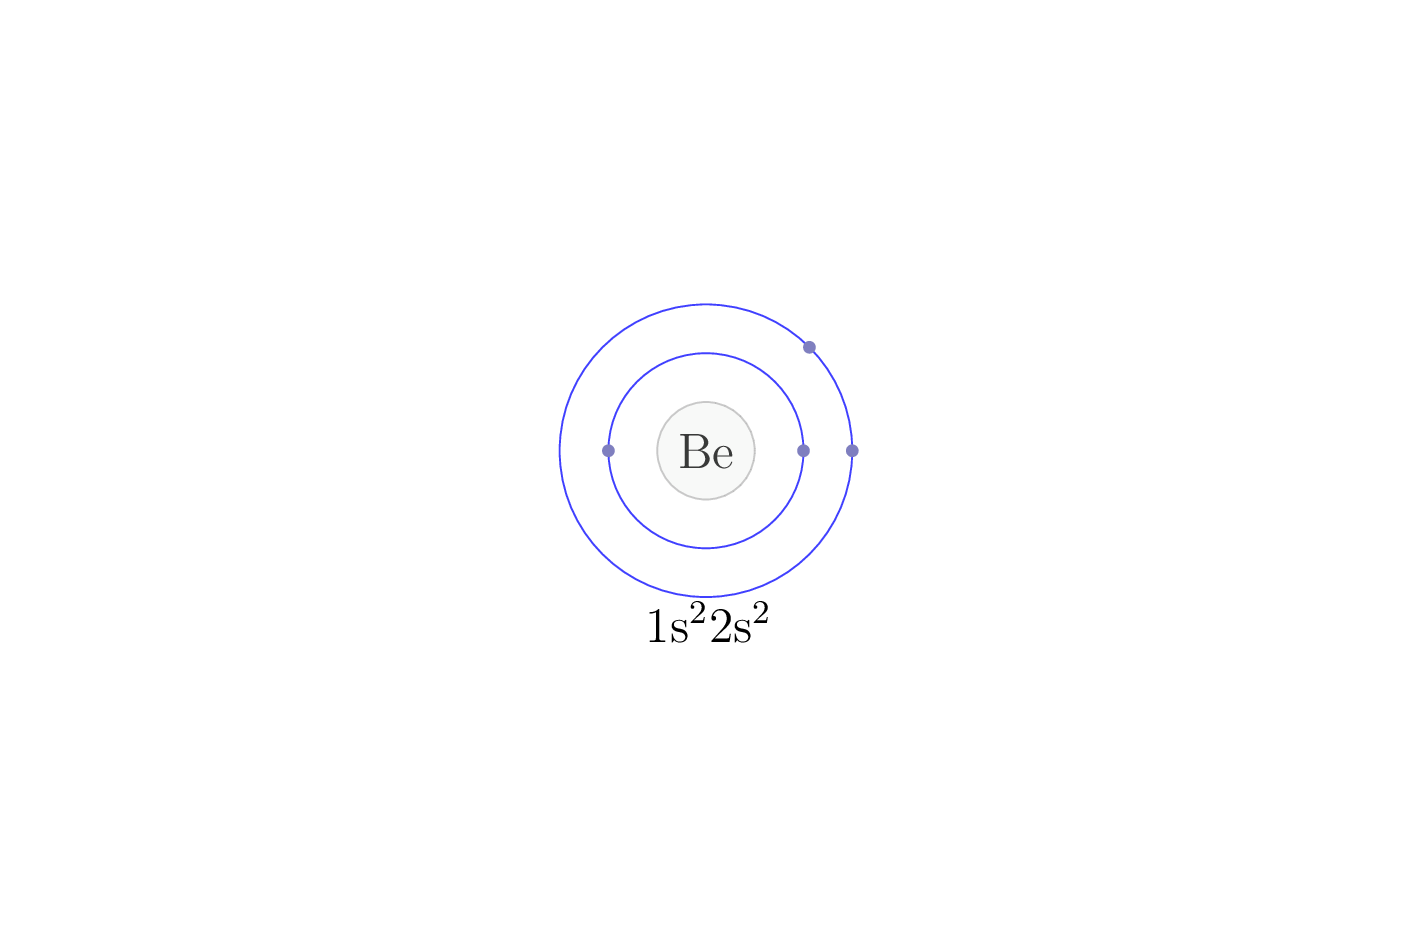 electron configuration of element Be